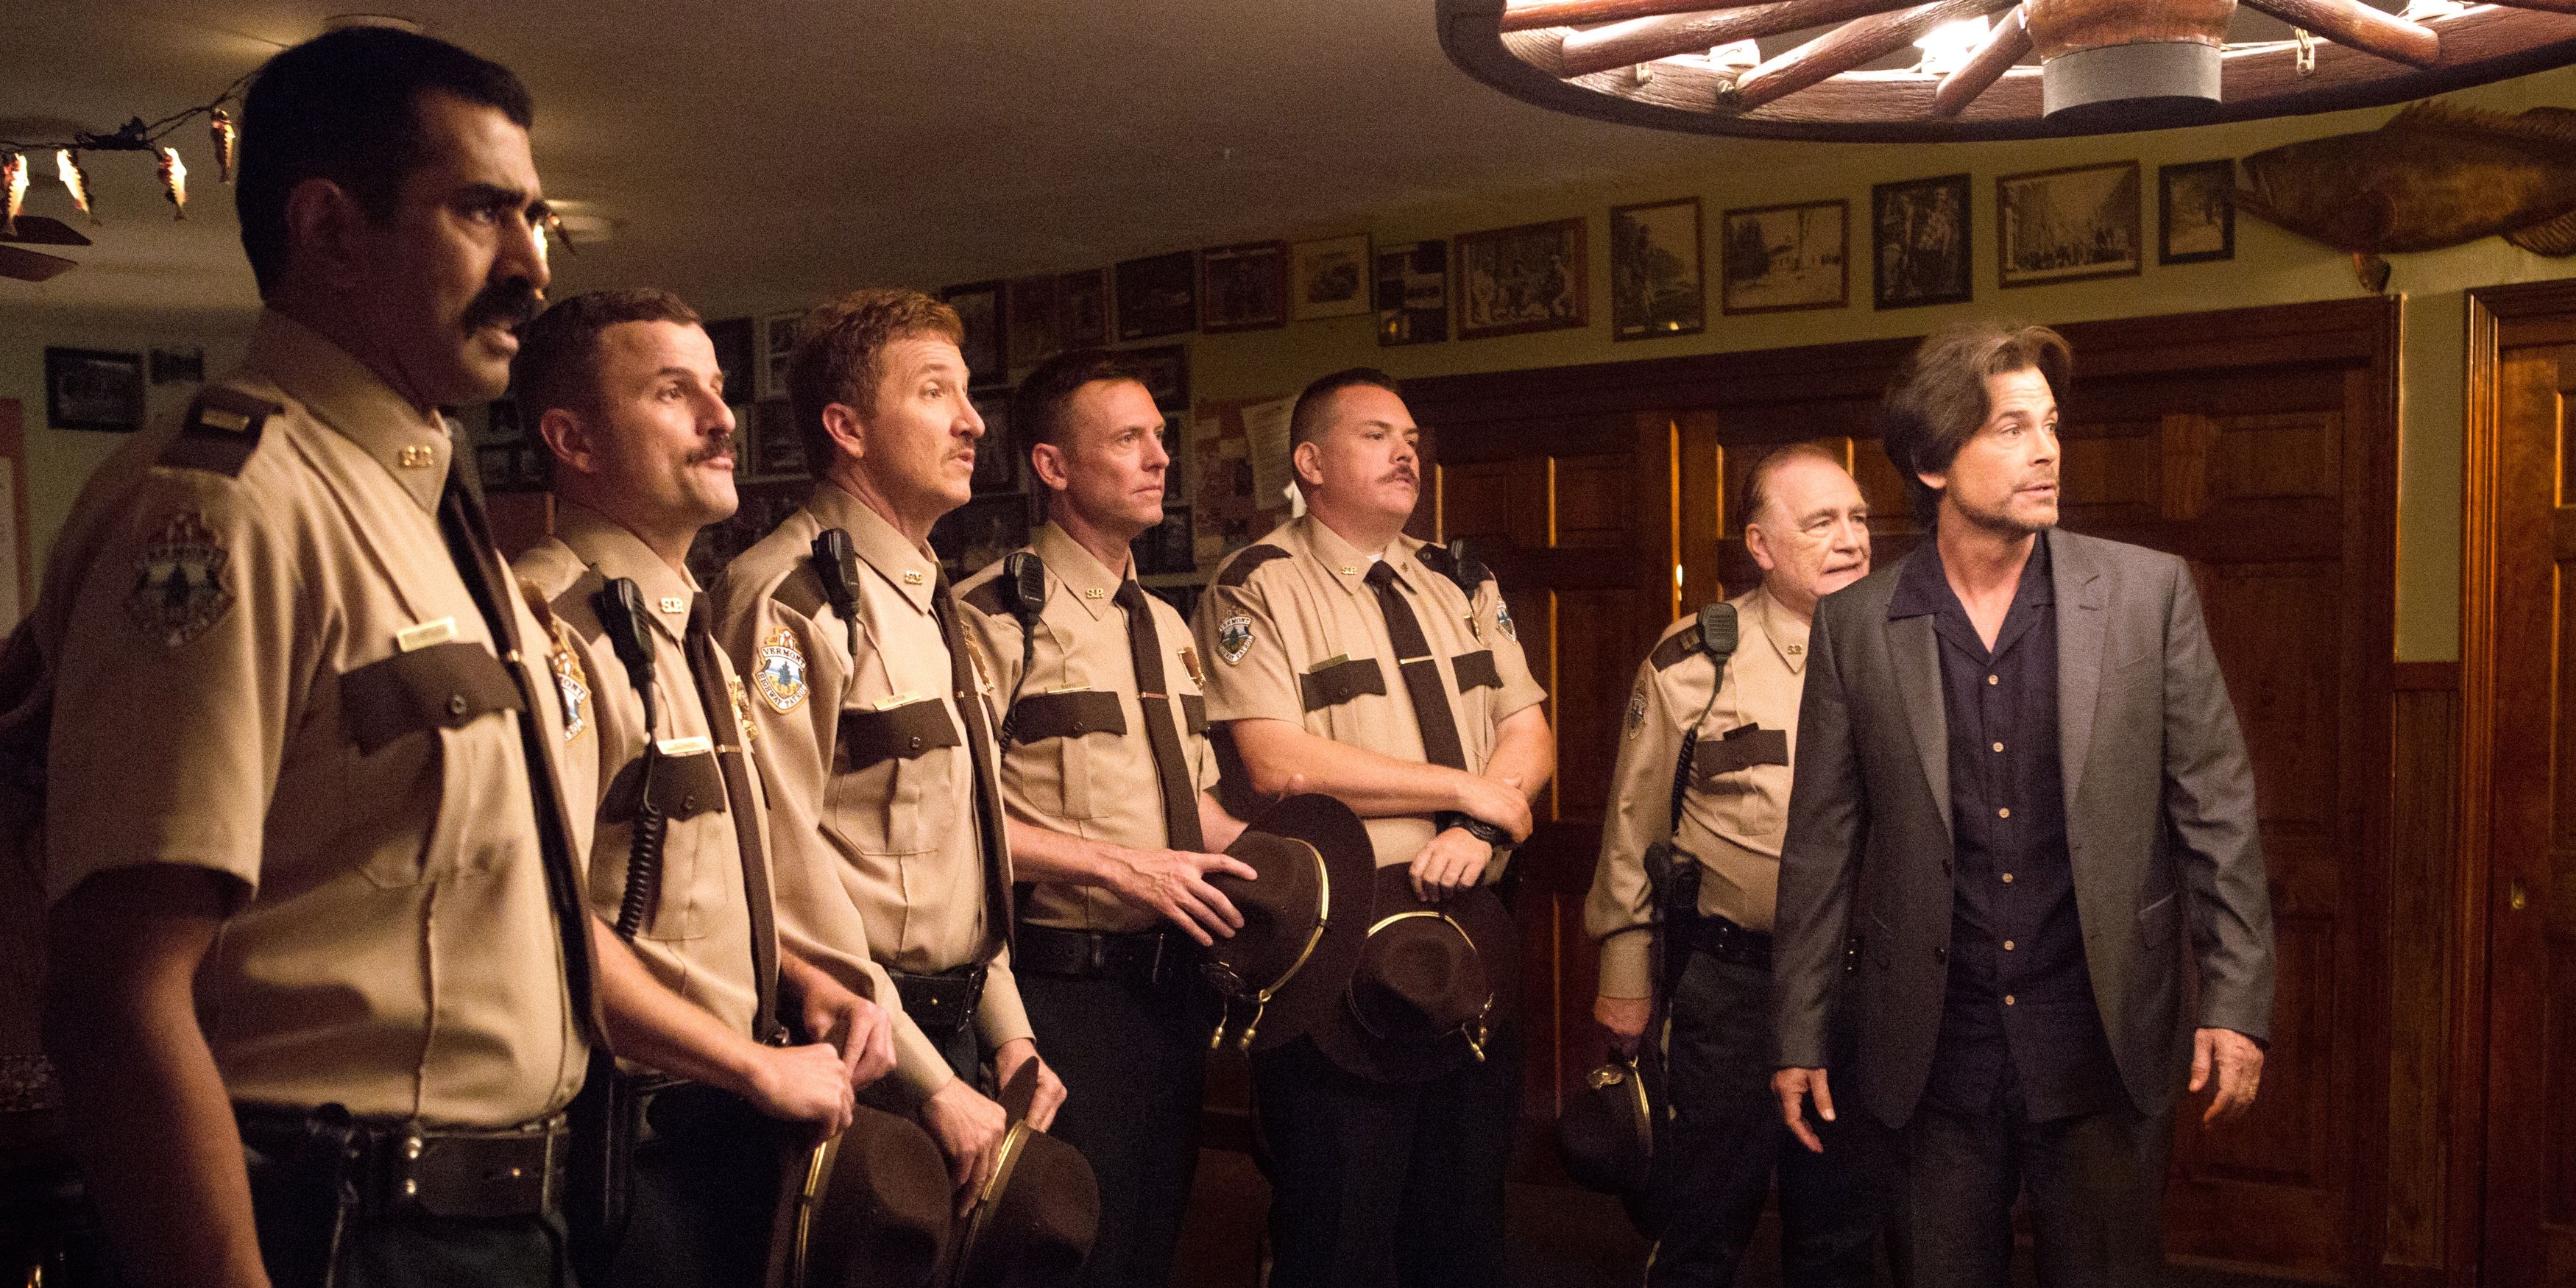 Screen Rant Interviews The Stars of Super Troopers 2